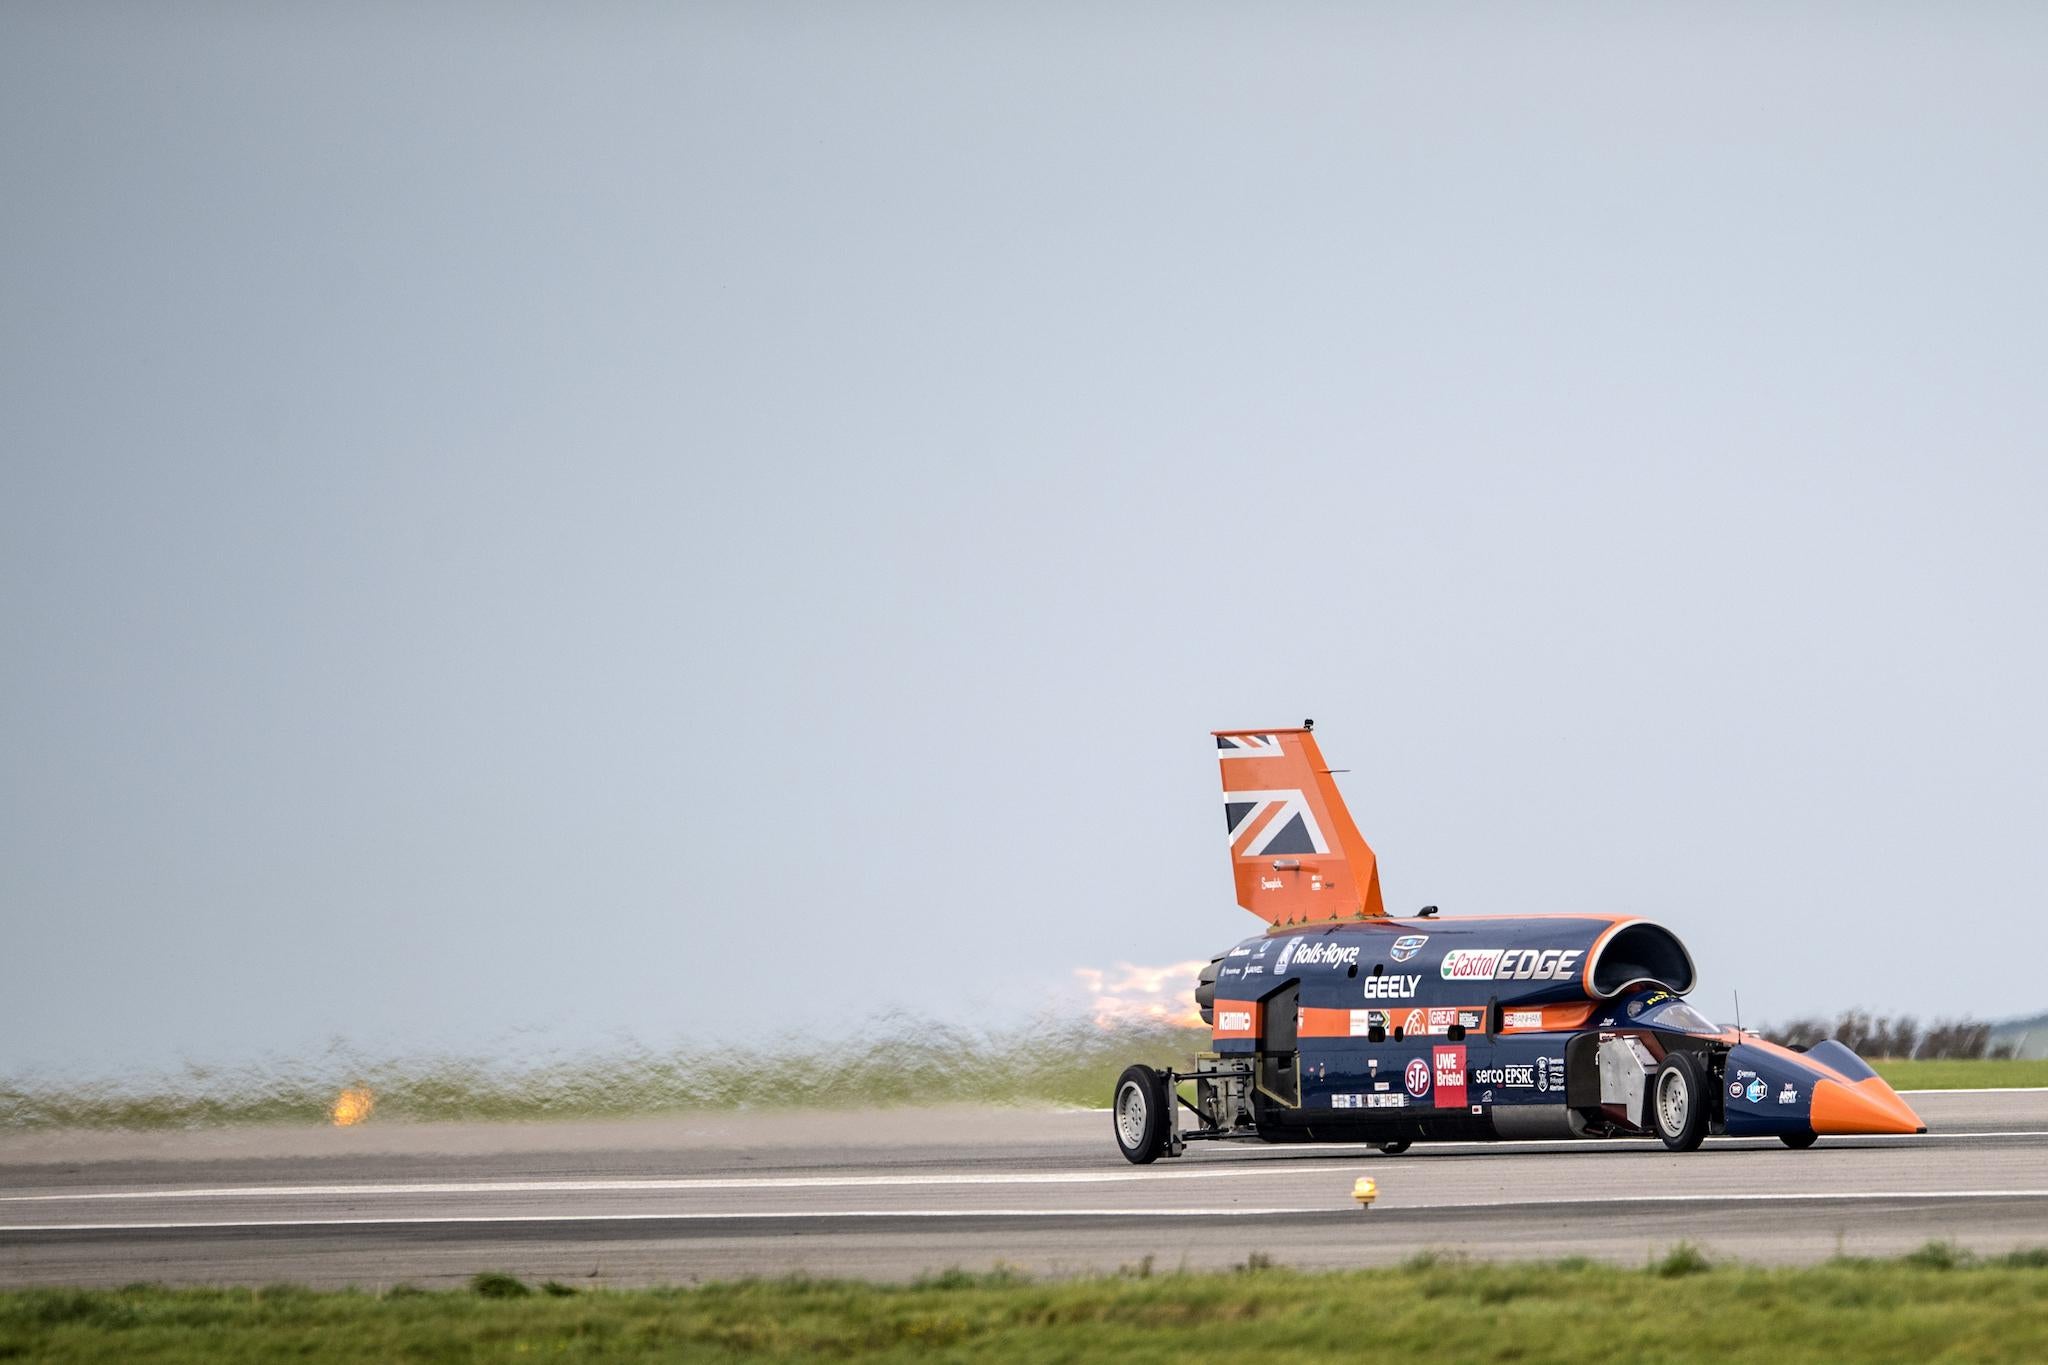 The Bloodhound supersonic car, driven by Royal Air Force Wing Commander Andy Green, undergoes a test run at the airport on October 26, 2017 in Newquay, England